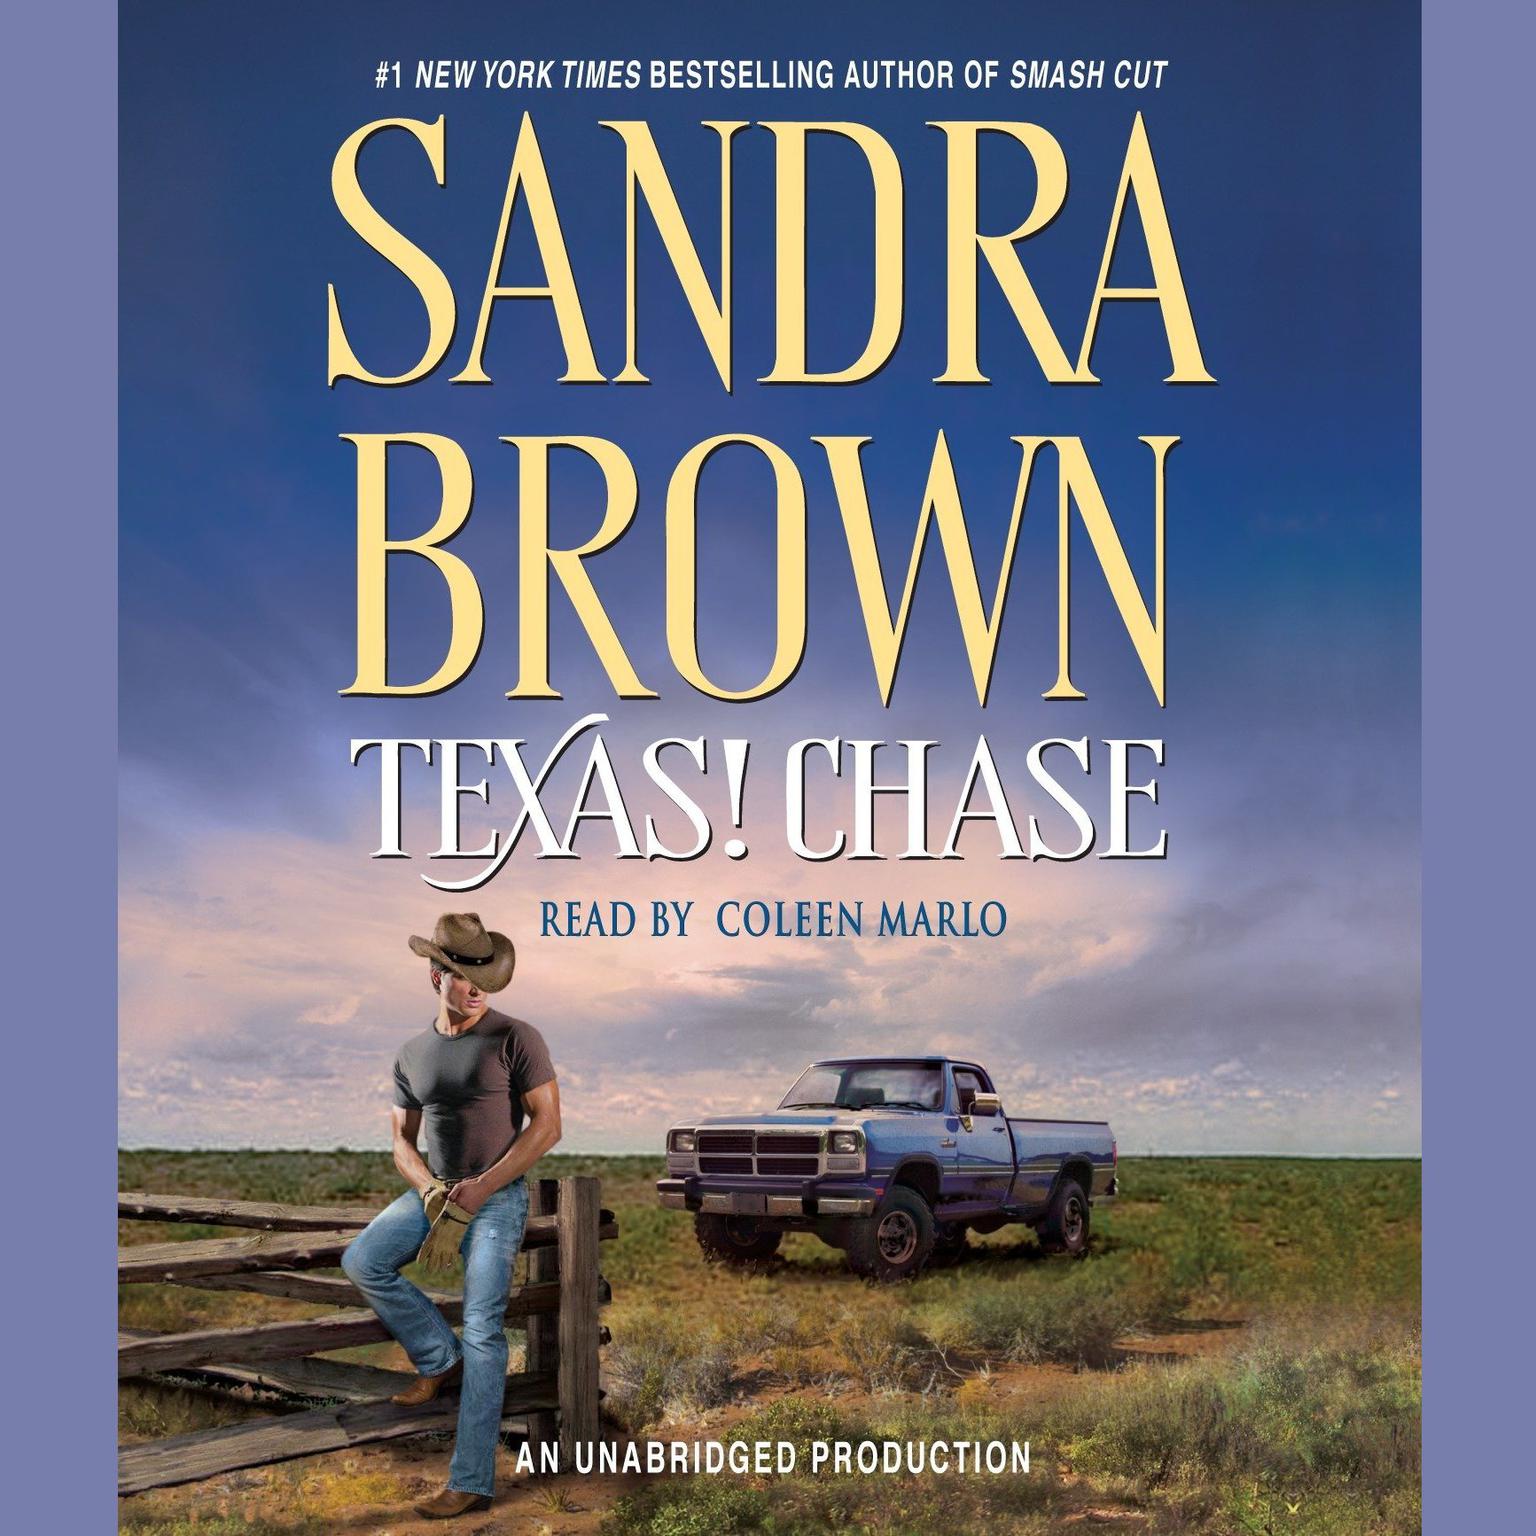 Texas! Chase: A Novel Audiobook, by Sandra Brown